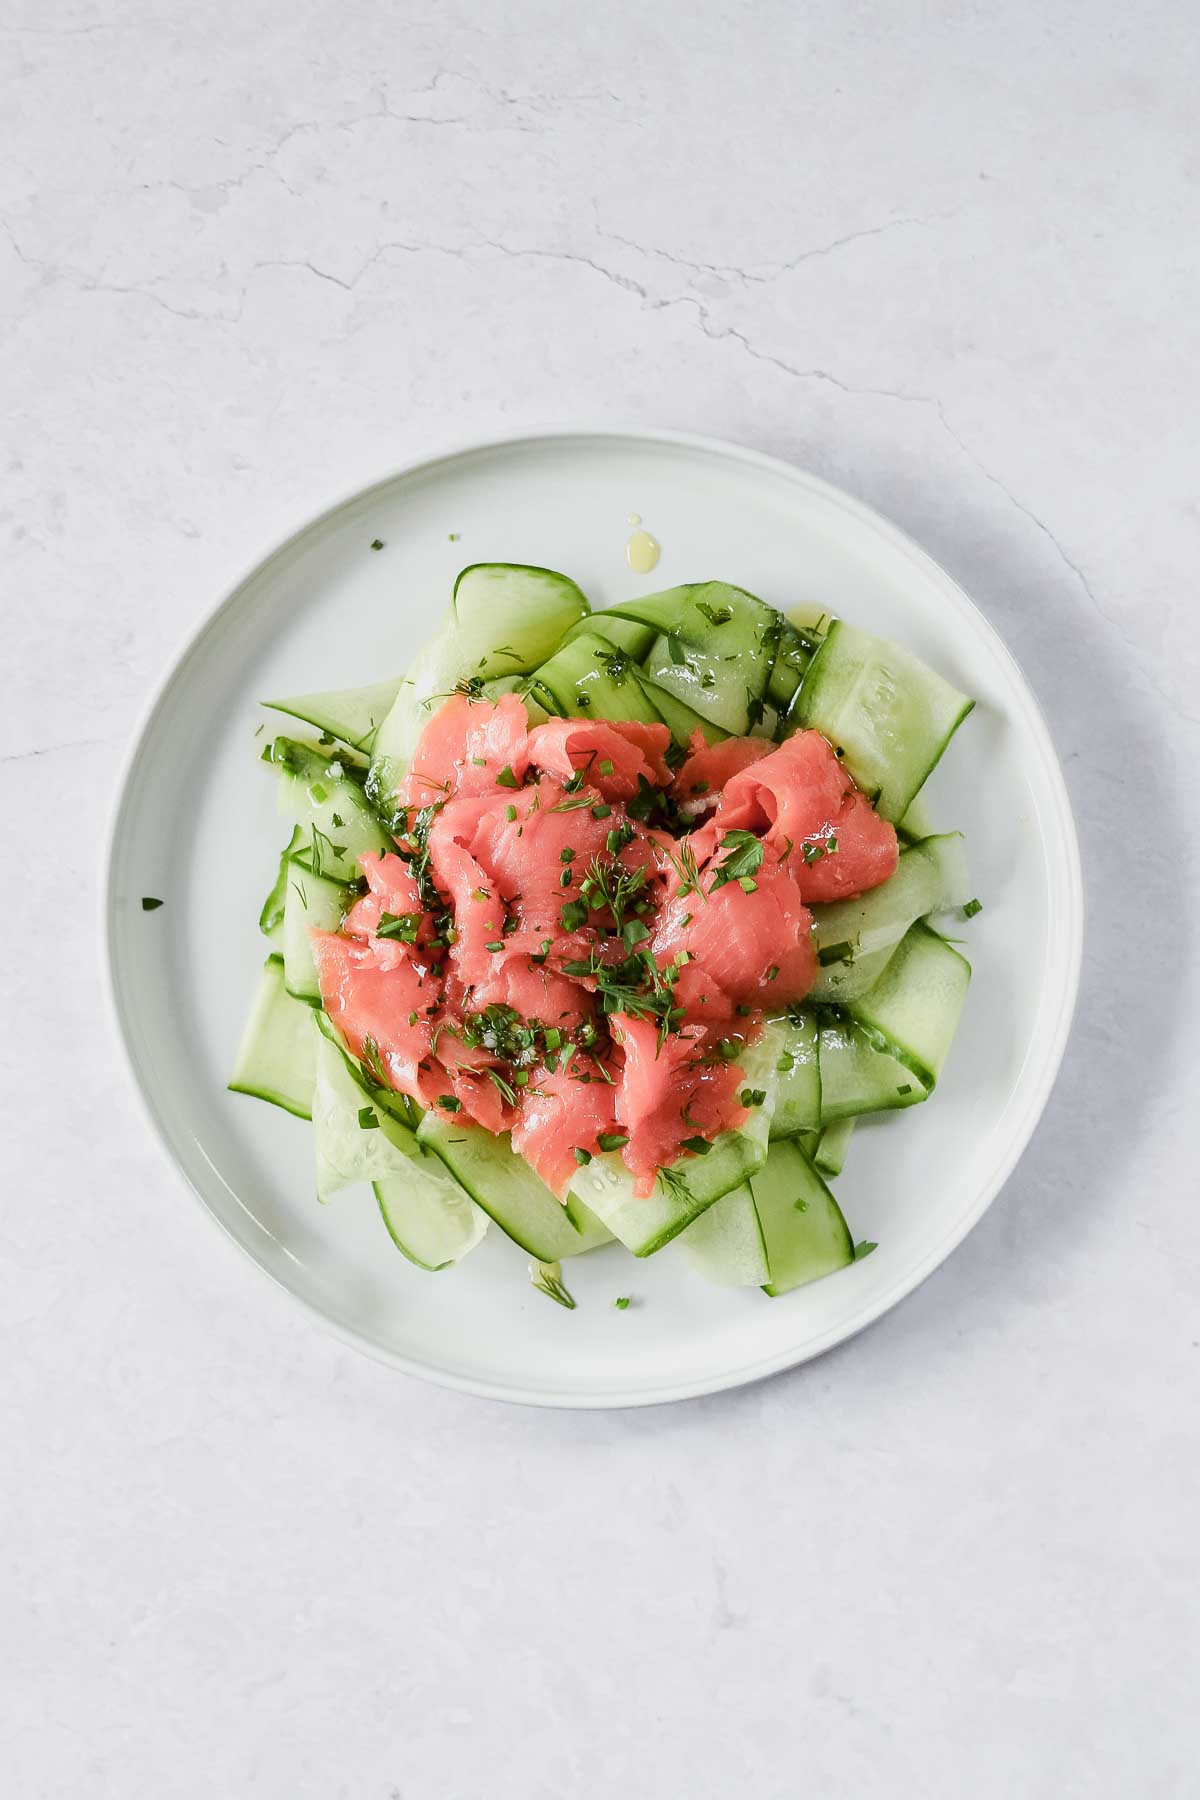 sliced cucumber, smoked salmon, and herb vinaigrette arranged on white plate.